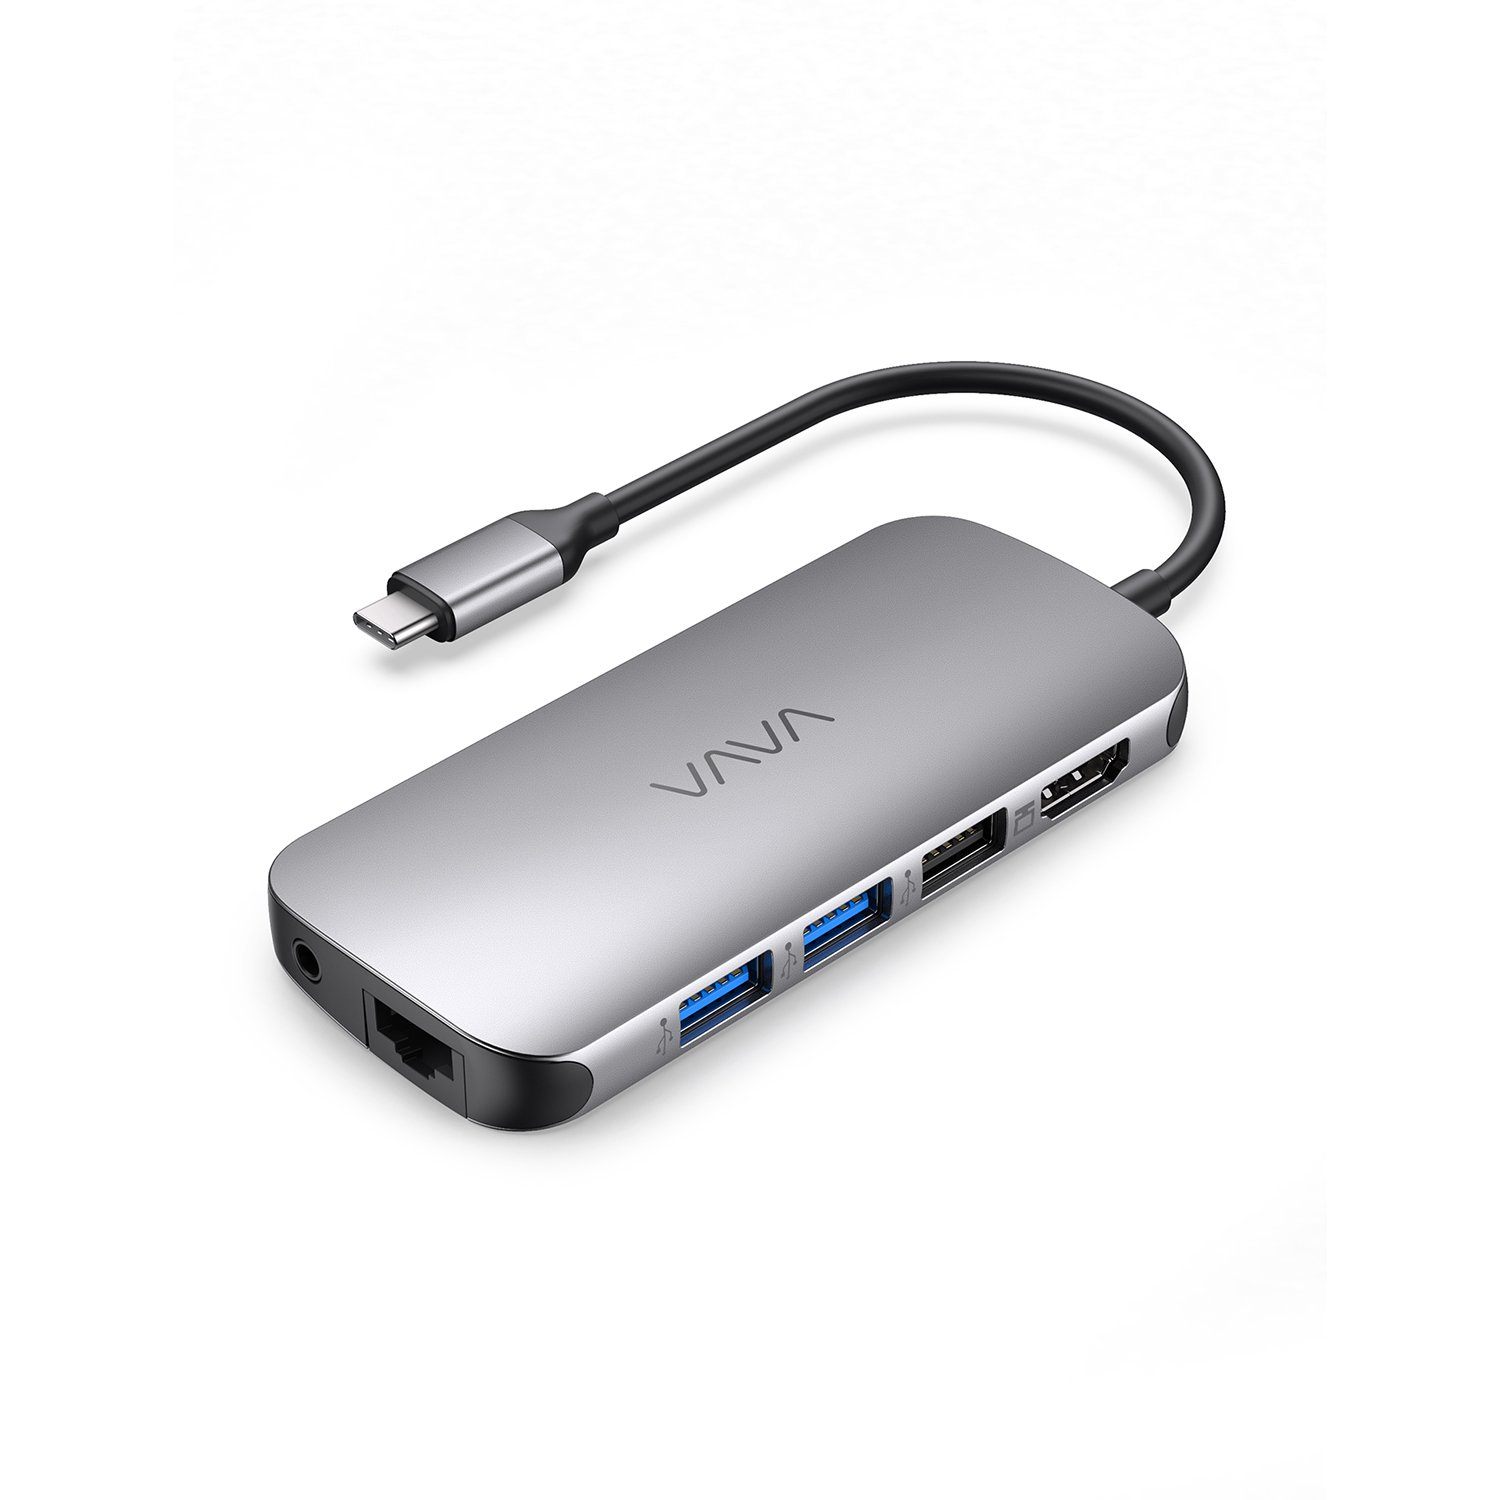 VAVA VA-UC016 9 in 1 USB C Hub with Ethernet Port, PD Power Delivery, 4K USB C to HDMI, USB 3.0 Ports, Audio Port, SD/TF Card Reade, Gray Default VAVA 